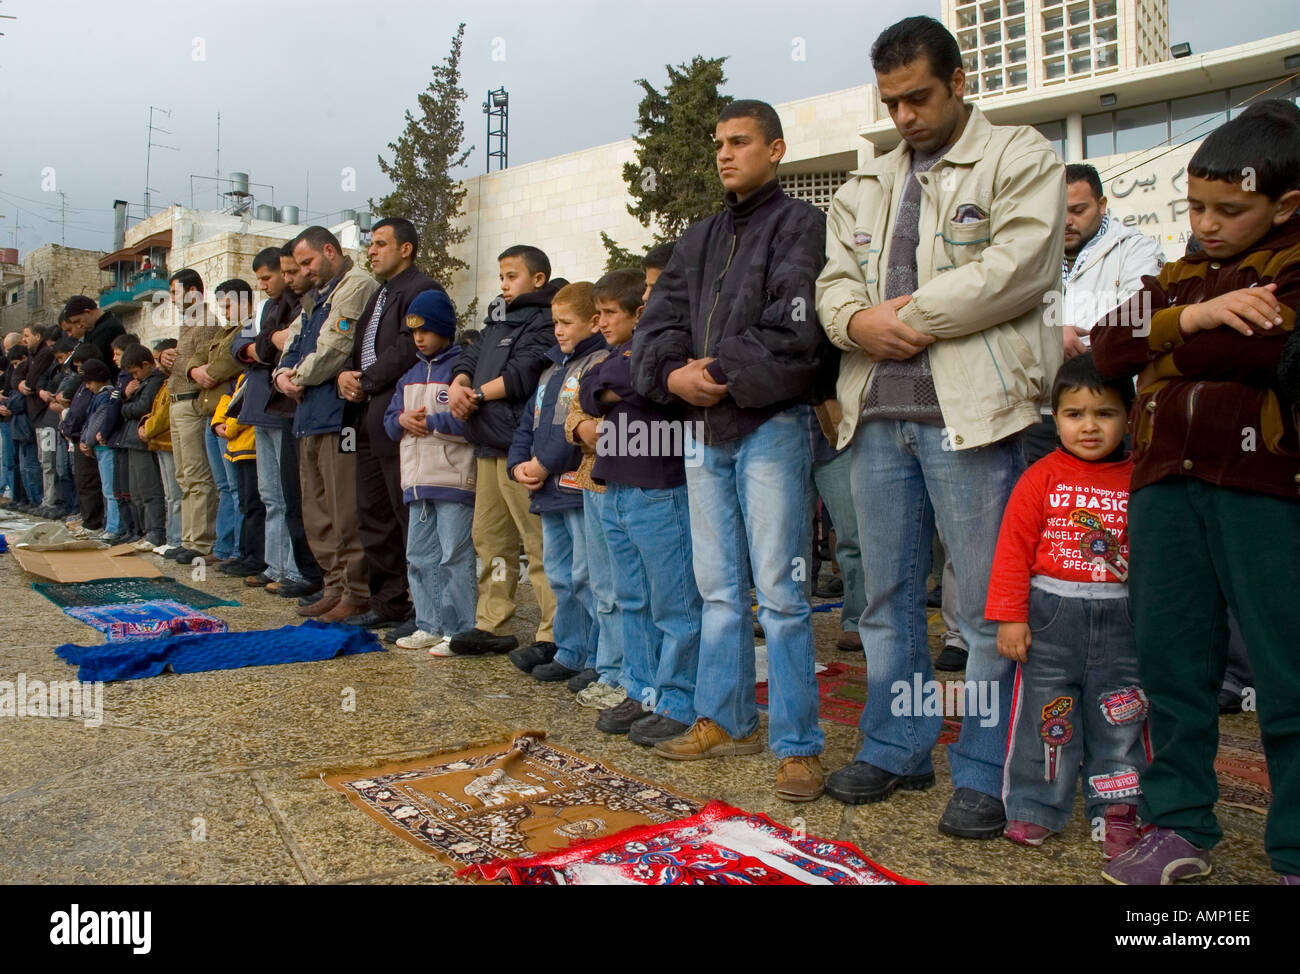 Palestinian Authority Bethlehem Manger Square row of muslem men praying outside with young child  Stock Photo